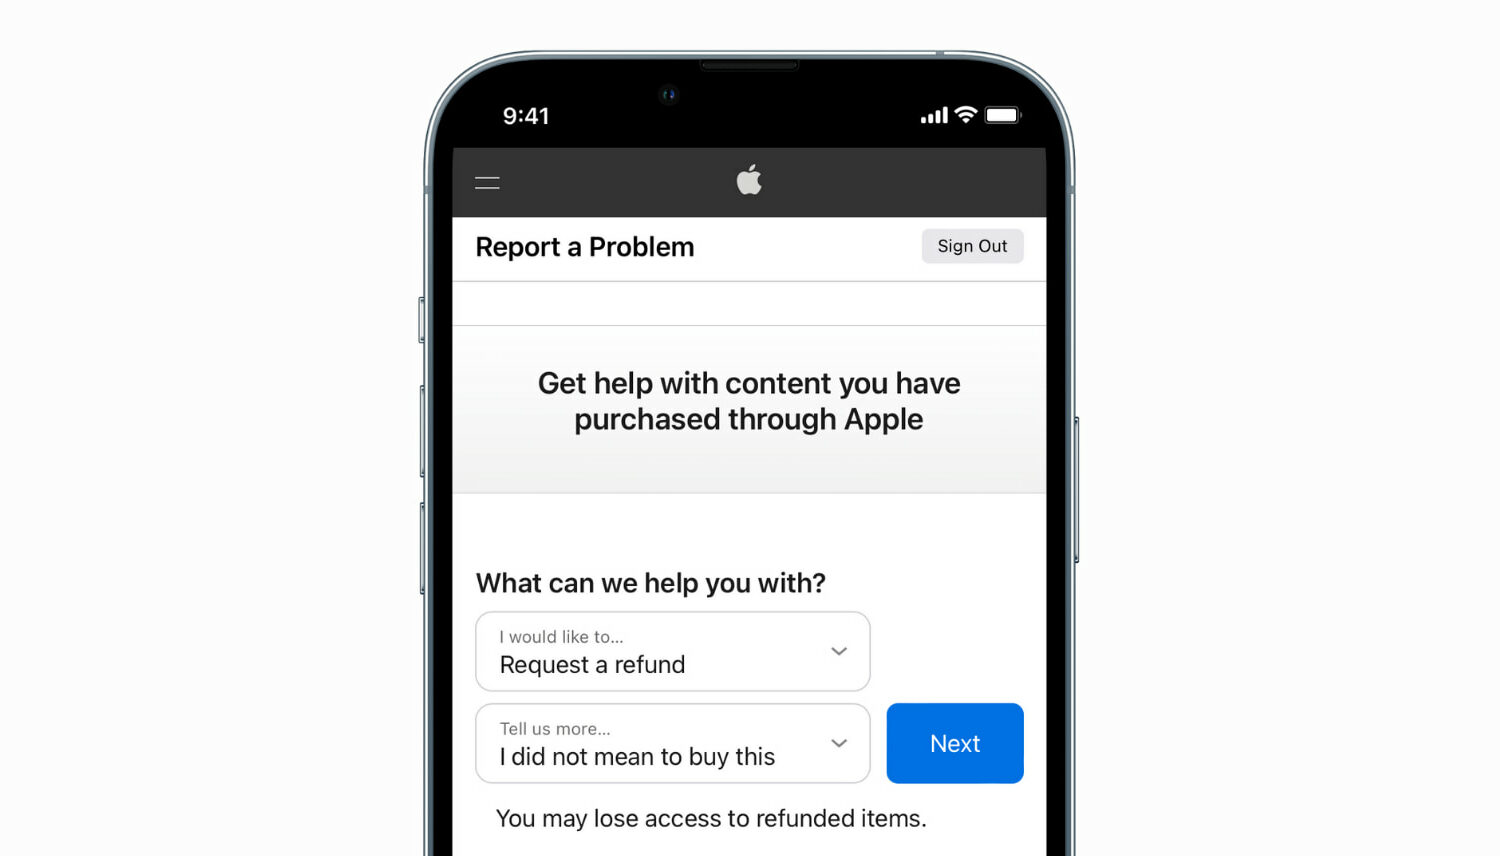 Report a Problem screen on iPhone for requesting refund from Apple